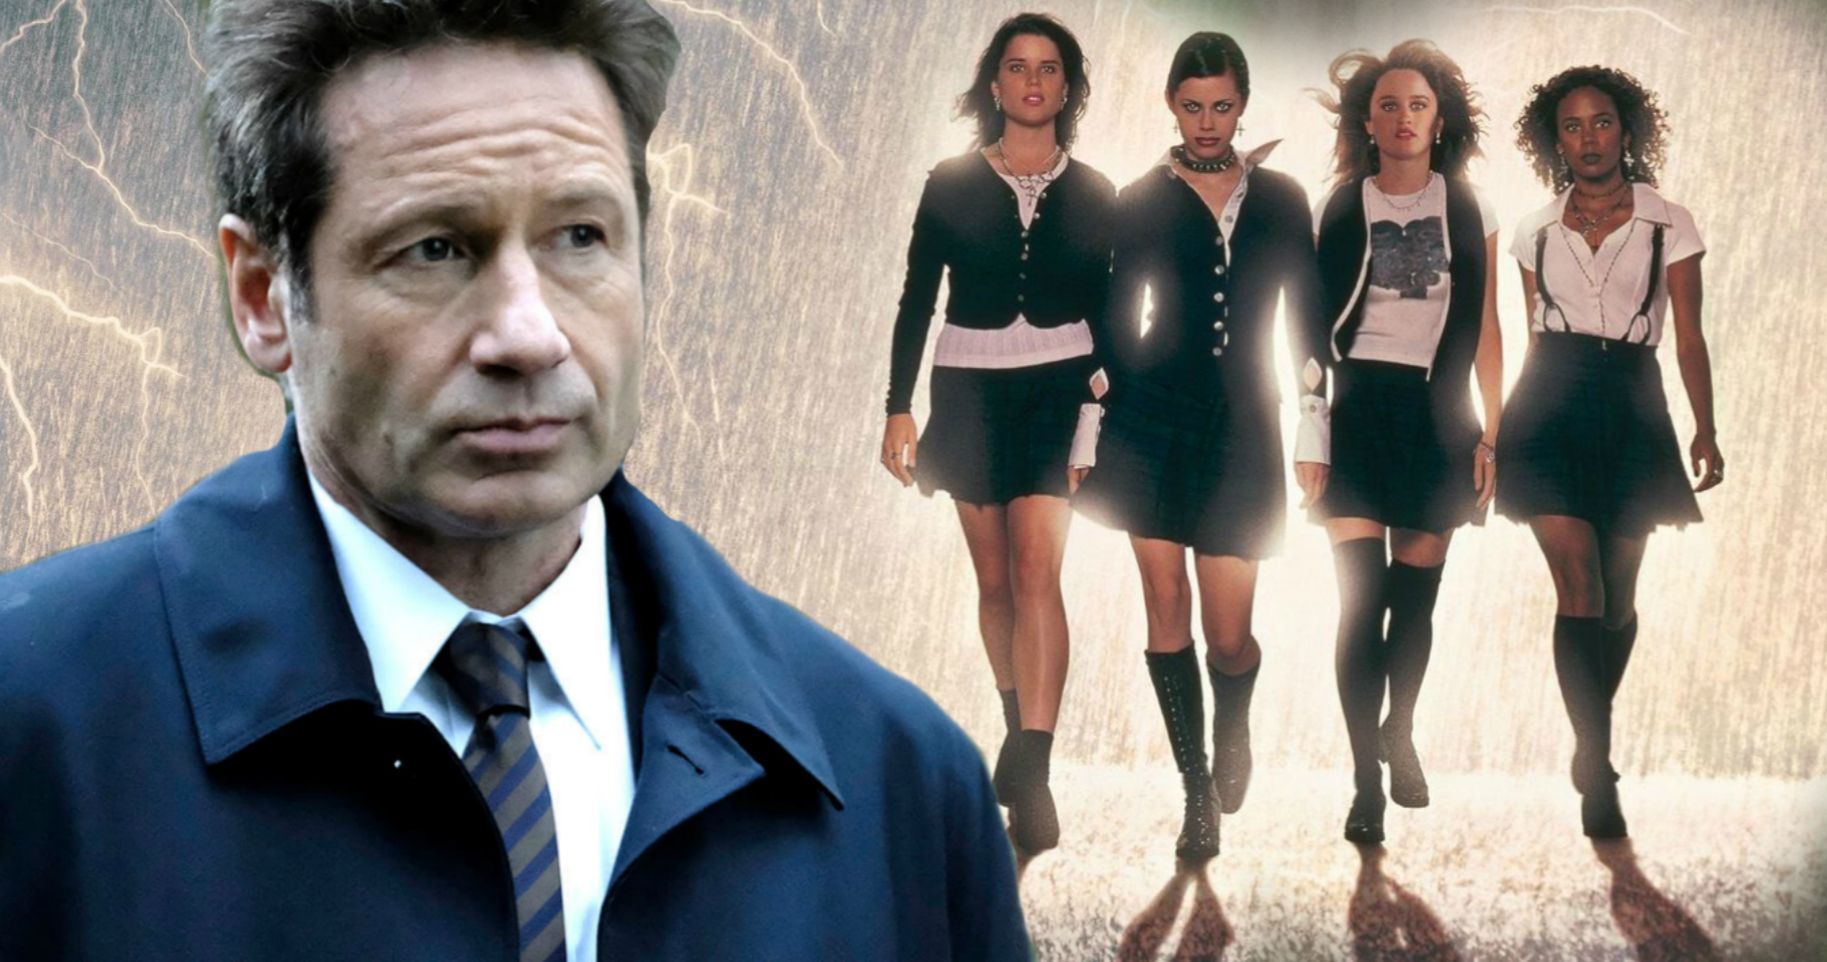 David Duchovny Takes on The Craft Remake